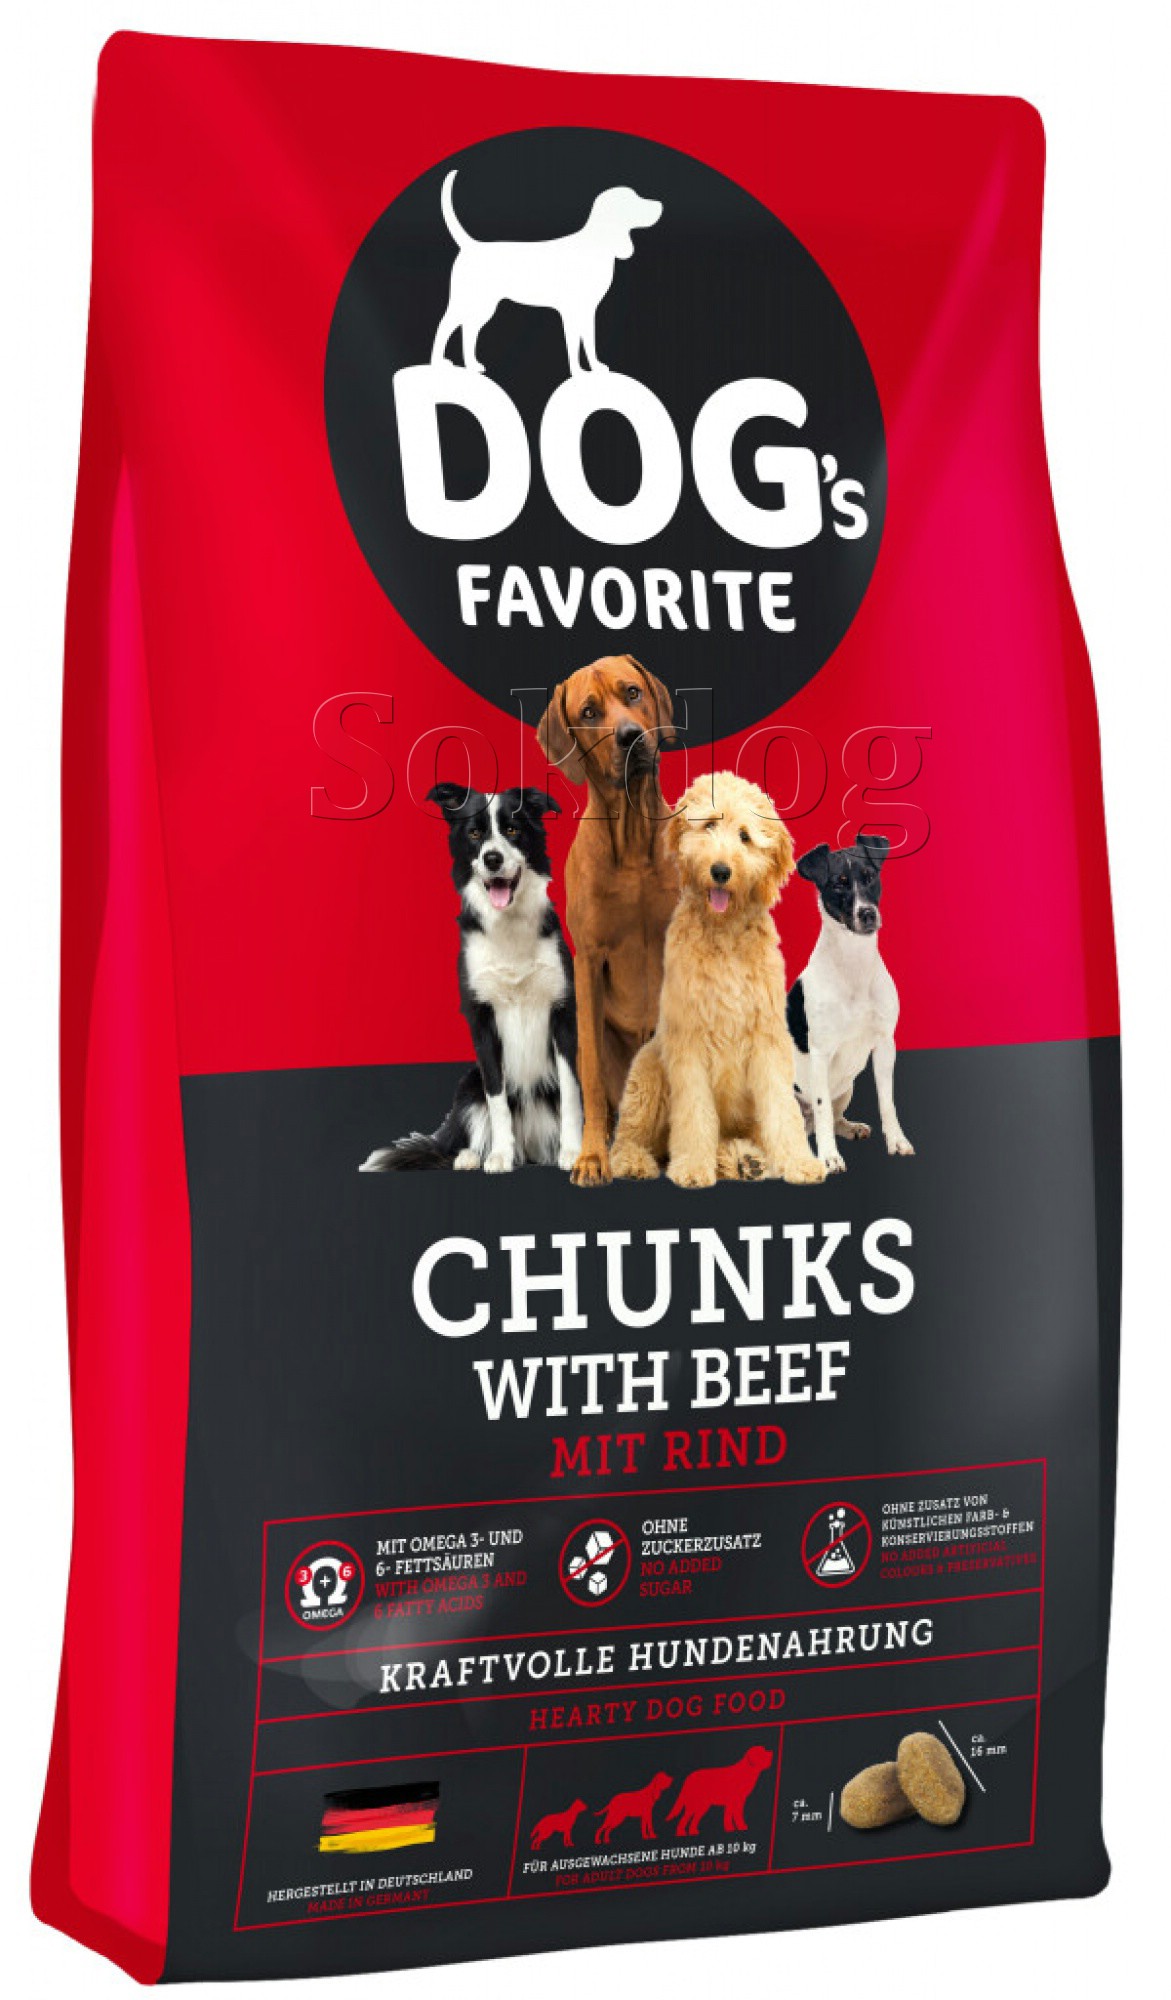 Dogs Favorite Chunks with Beef 15kg